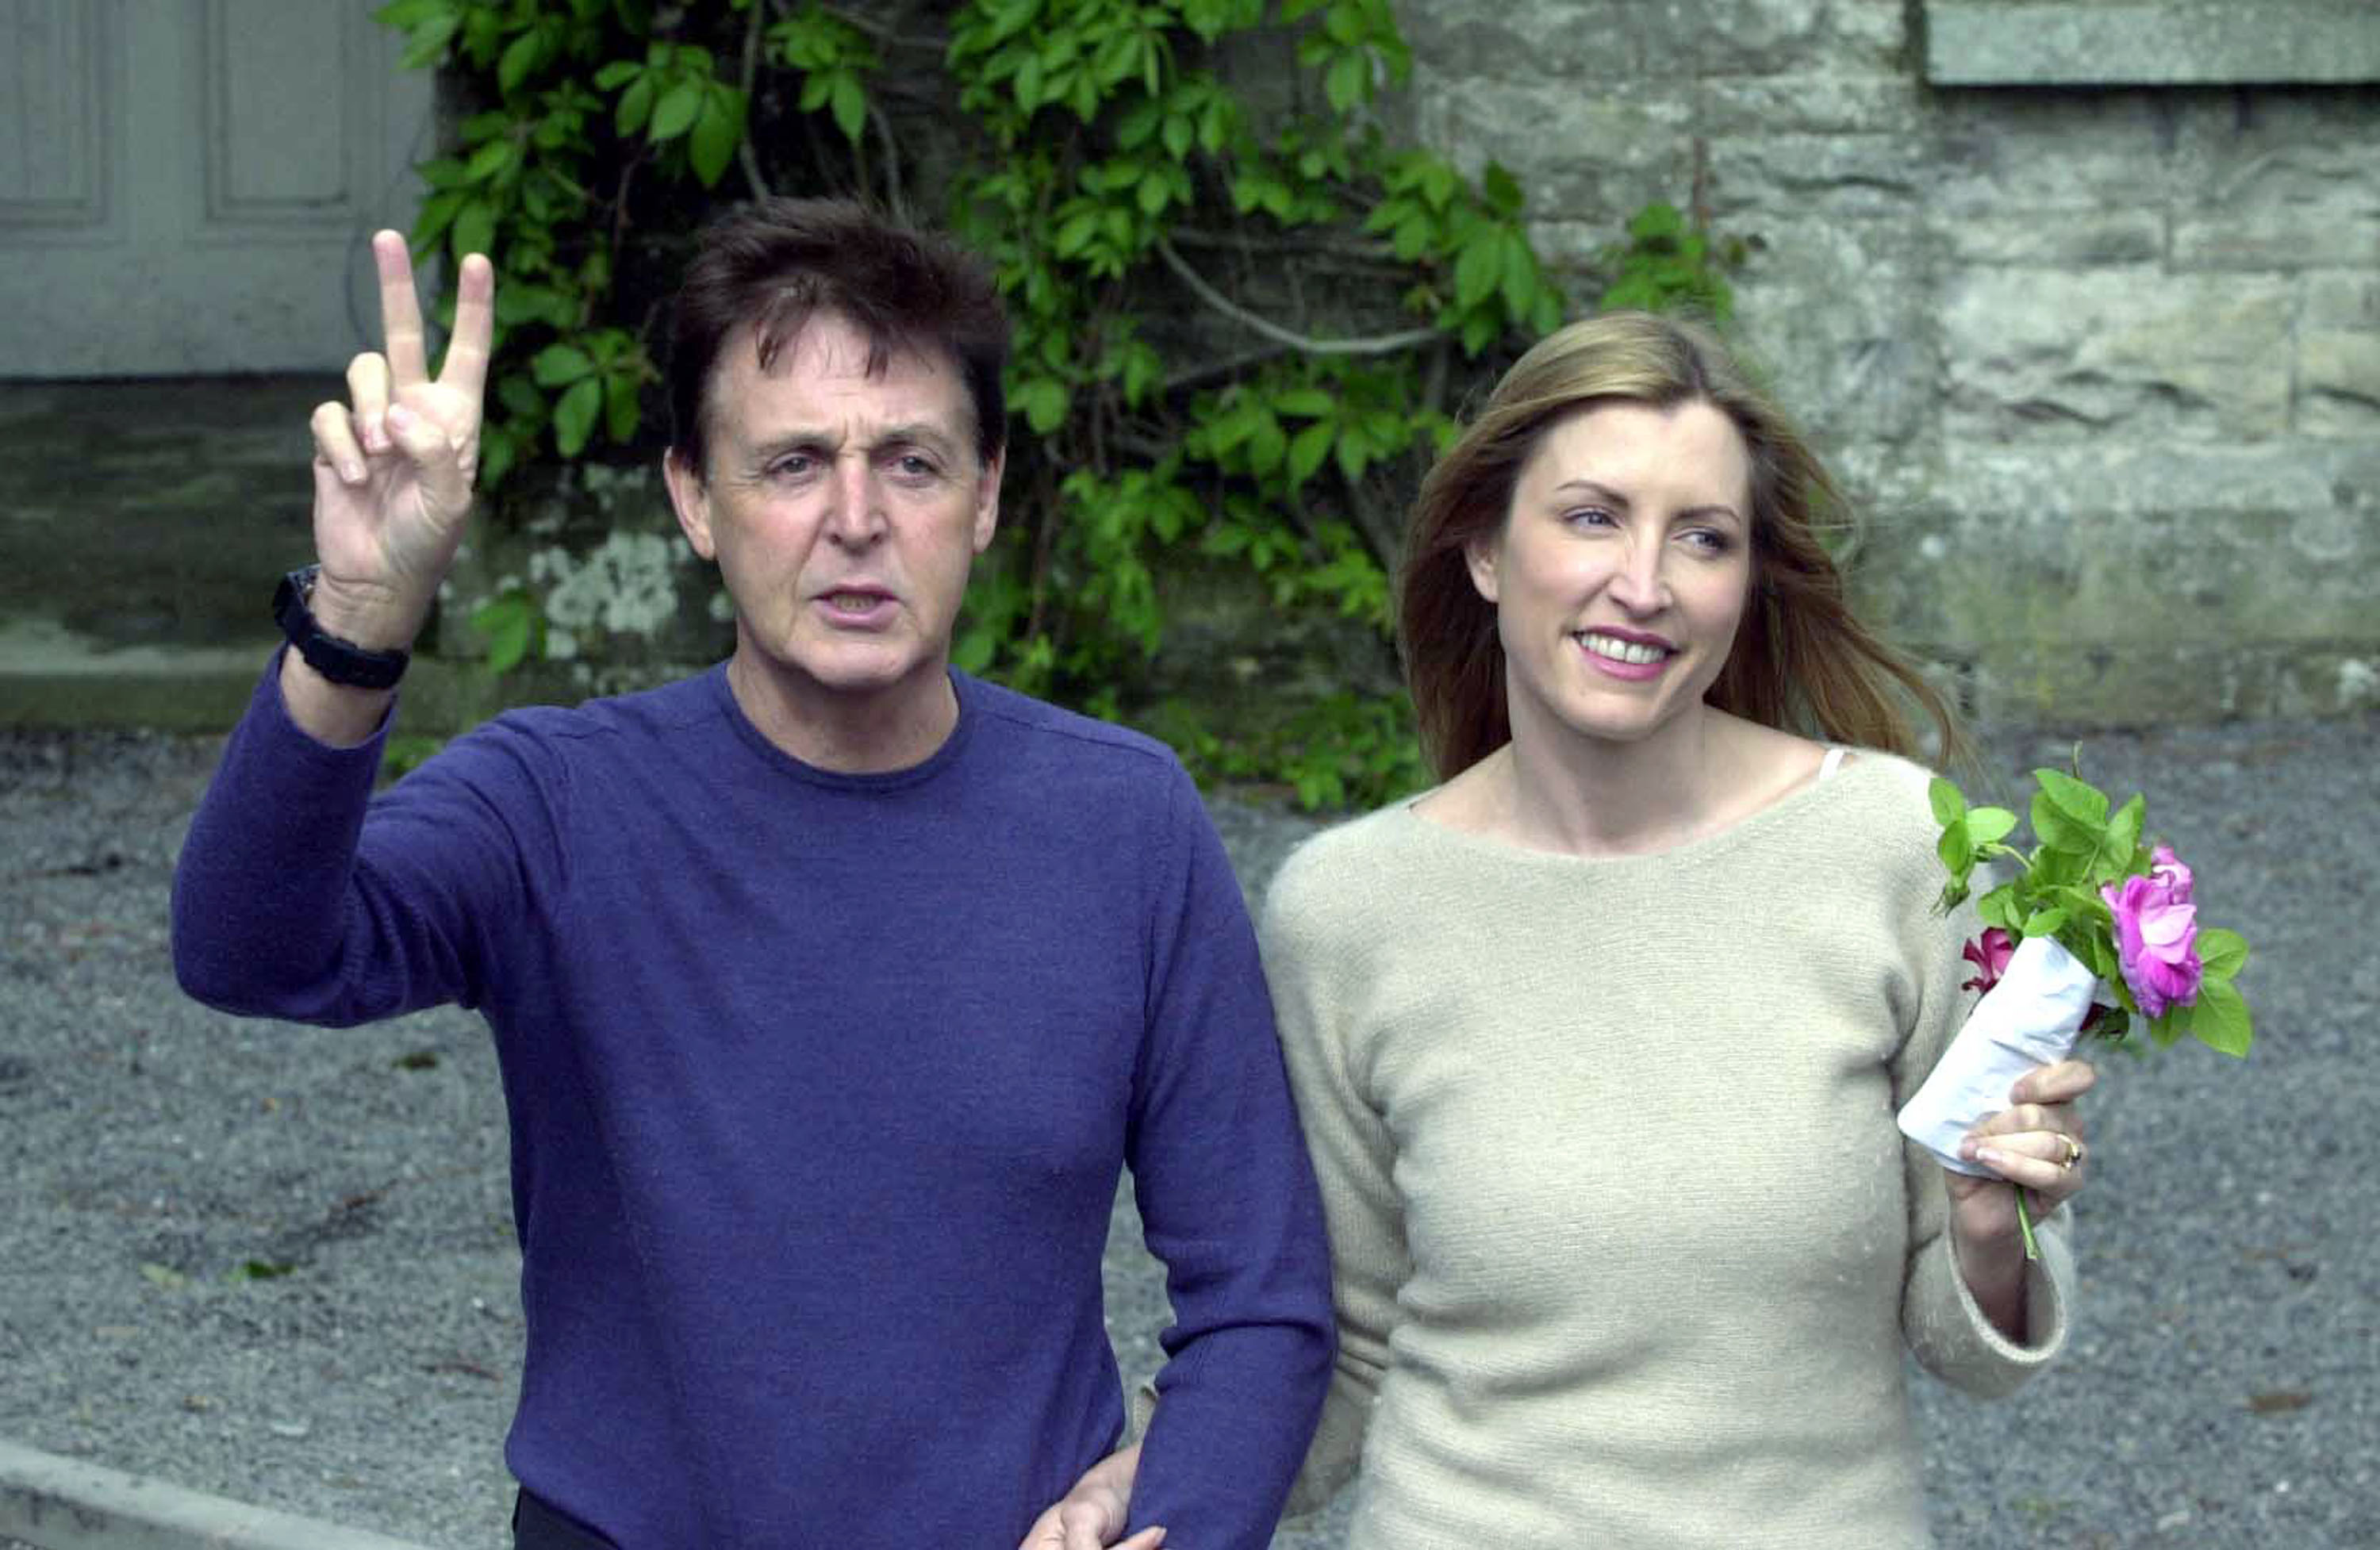 Paul McCartney and Heather Mills at Castle Leslie in 2002. | Source: Getty Images